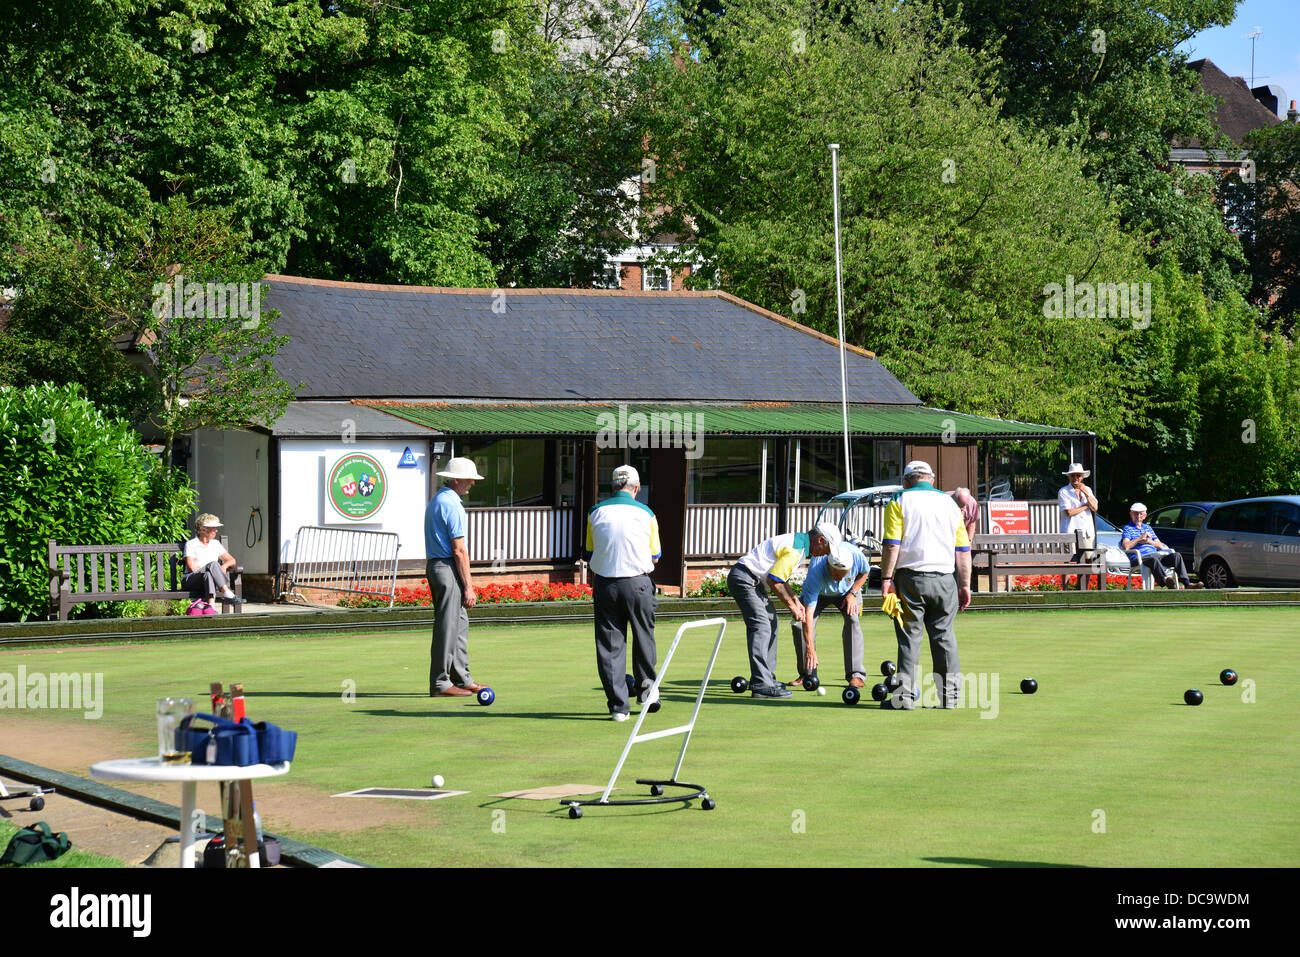 Lawn bowls match at Windsor and Eton Bowling Club, The Goswells, Windsor, Berkshire, England, United Kingdom Stock Photo